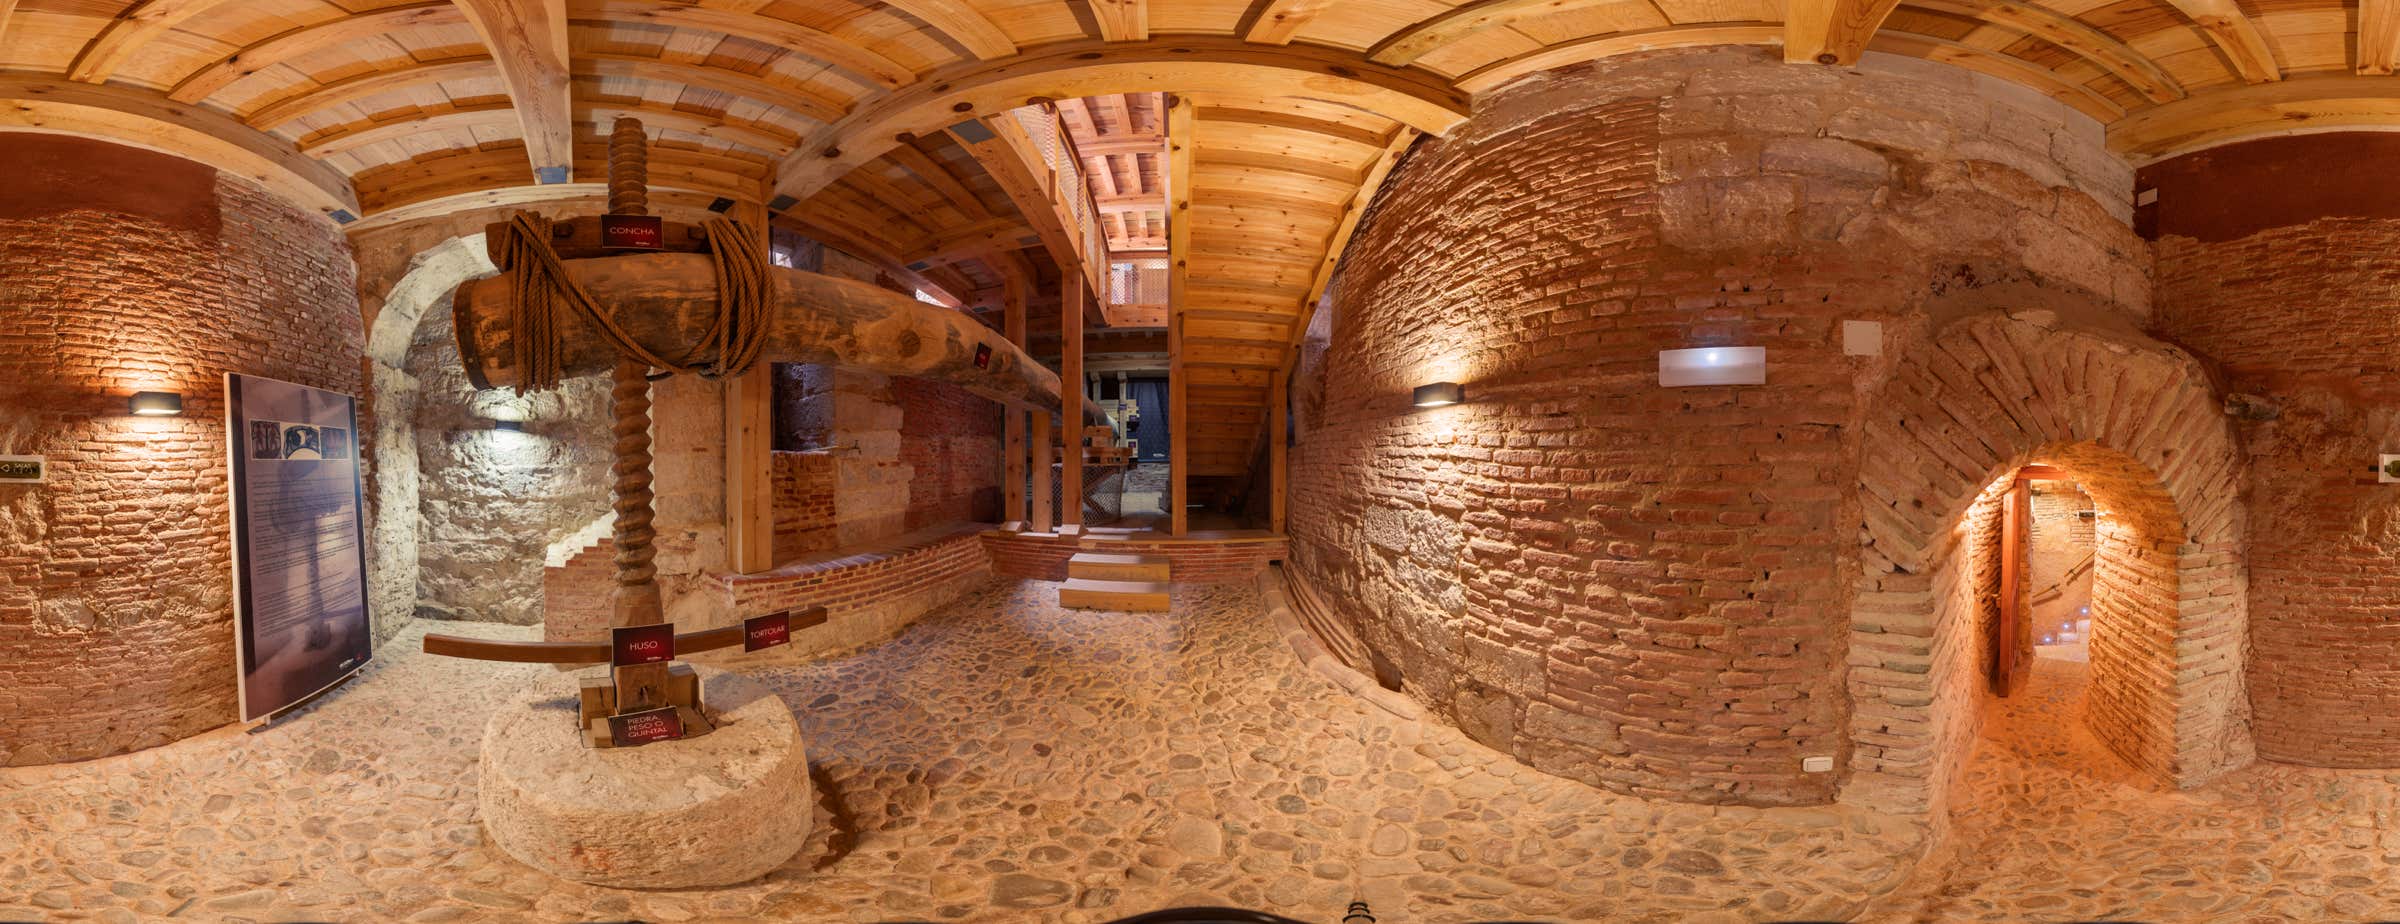 360° panoramic image inside the museum showing a large wooden press used to extract the juice from grapes.